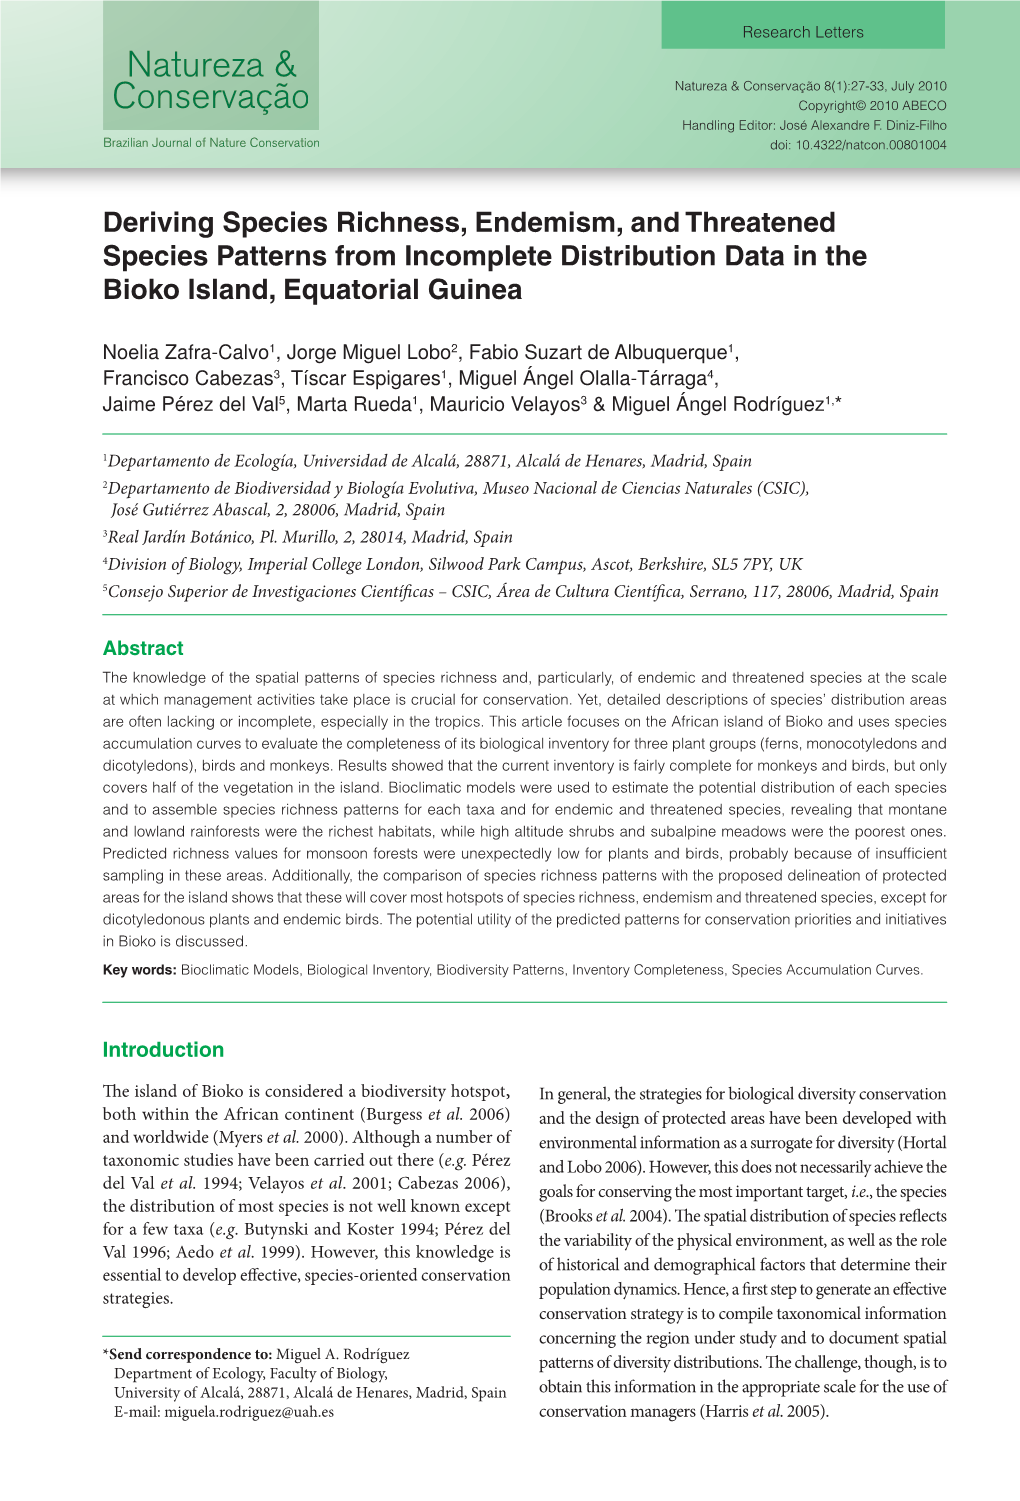 Deriving Species Richness, Endemism, and Threatened Species Patterns from Incomplete Distribution Data in the Bioko Island, Equatorial Guinea